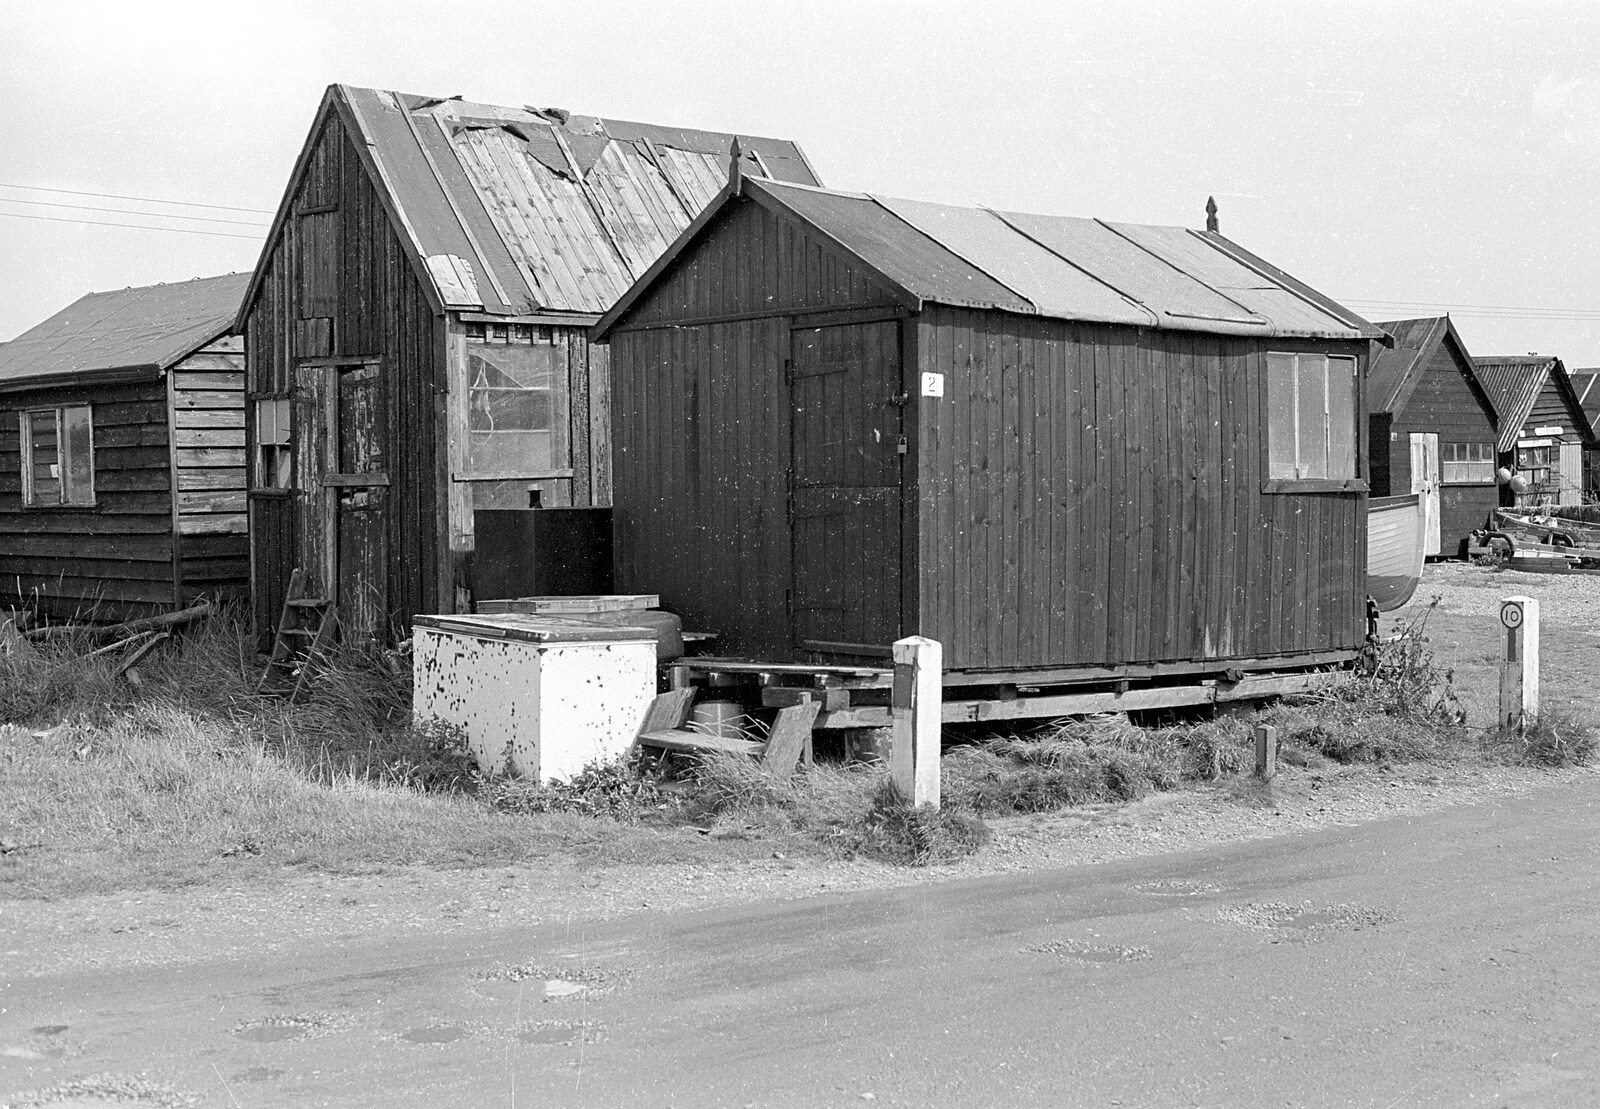 More old fishermen's huts on Blackshore from Blackshore Quay in Black and White, Southwold and Sizewell, Suffolk - 16th September 1992